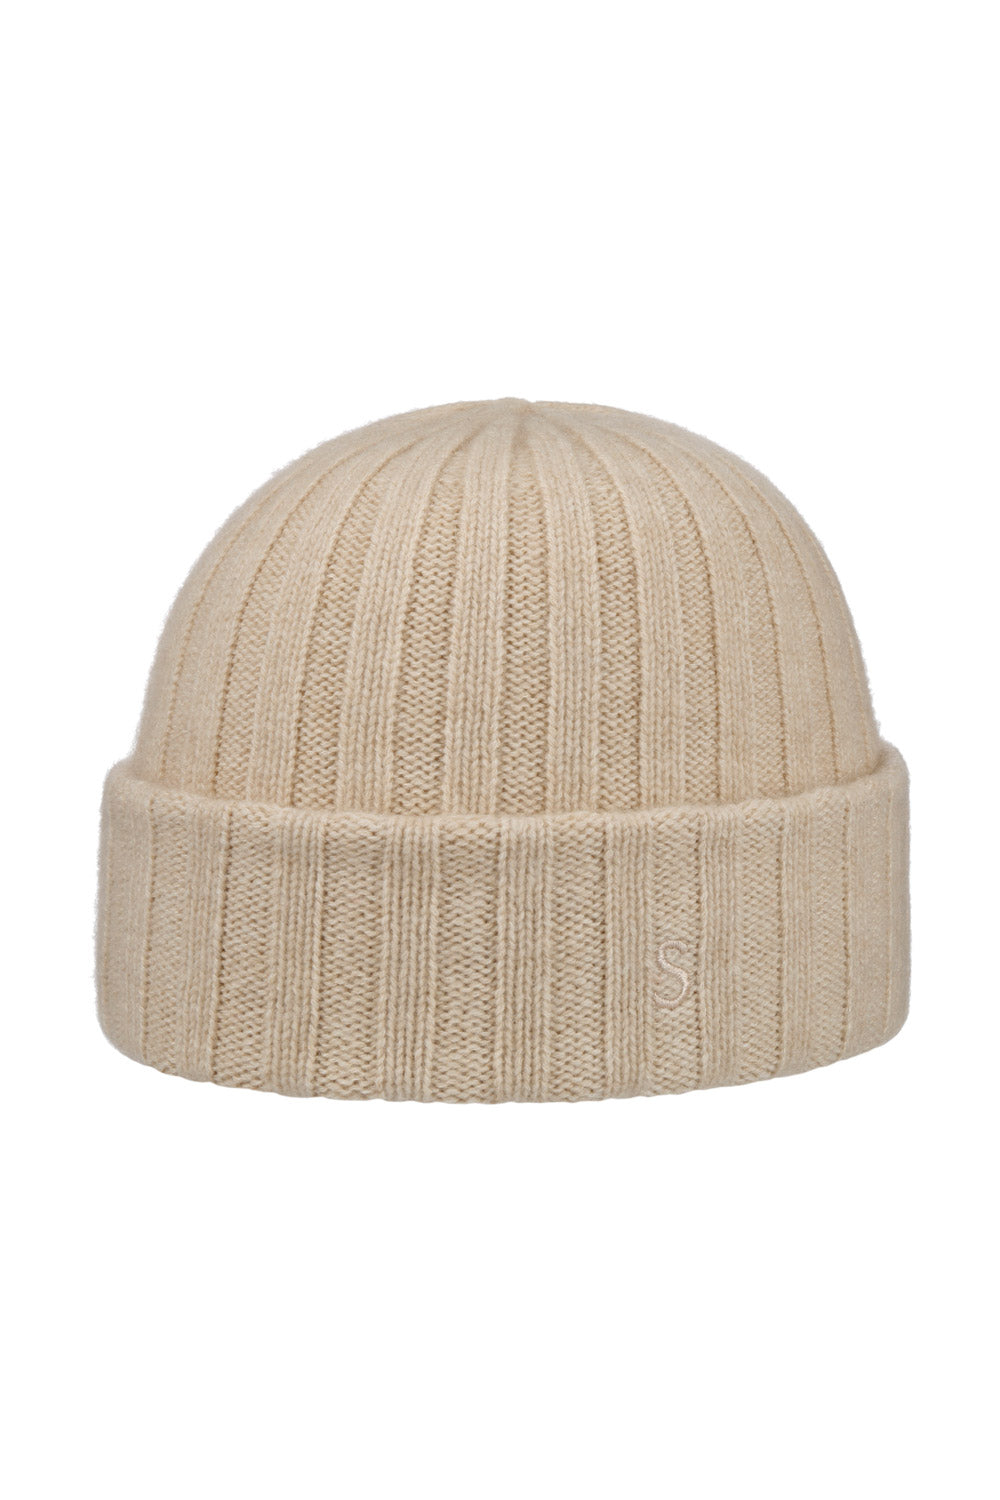 Buy the Stetson Undyed Sustainable Cashmere Beanie in Beige at Intro. Spend £50 for free UK delivery. Official stockists. We ship worldwide.